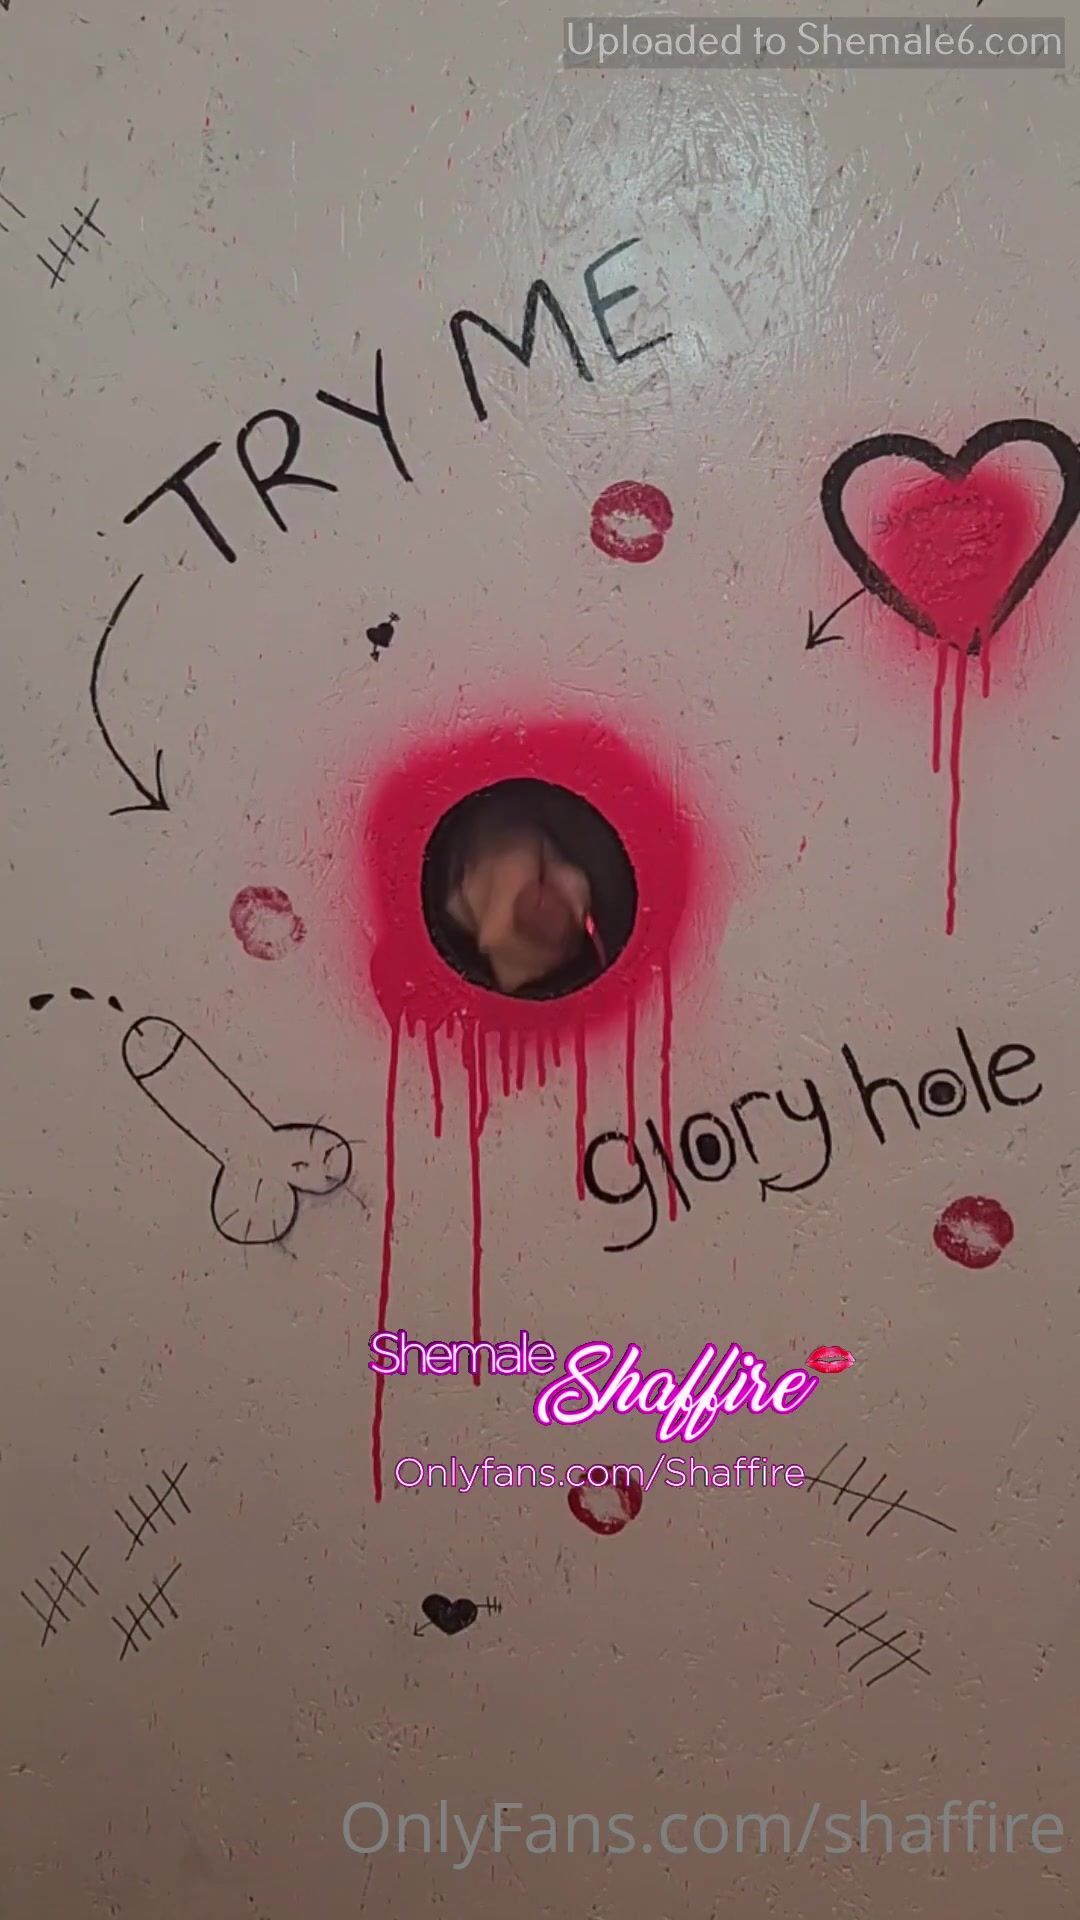 Shaffire You Voted For Here Cumming Though Glory Hole Like This photo photo